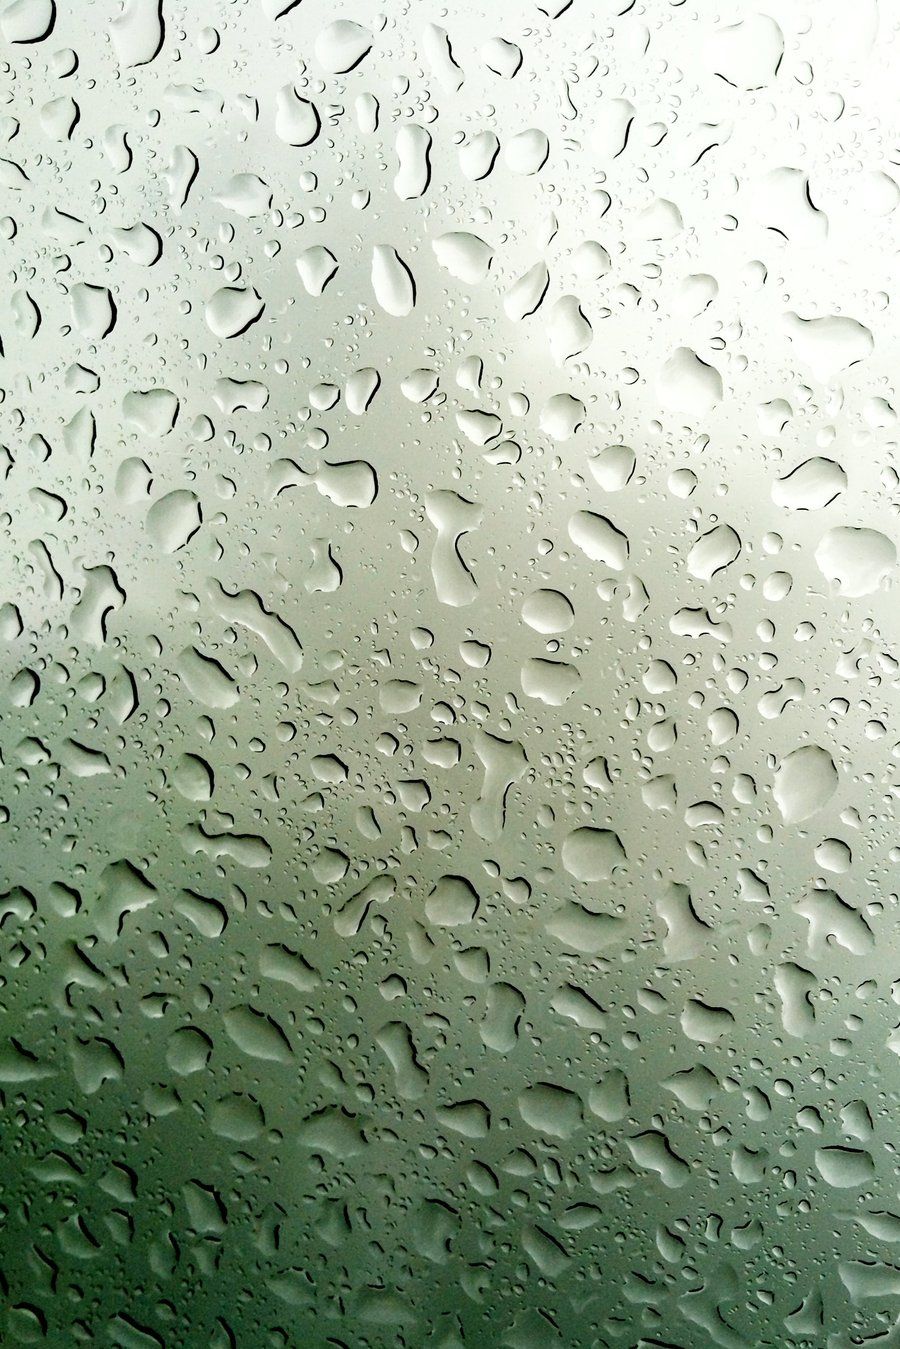 IPhone Raindrop Wallpapers Group 68